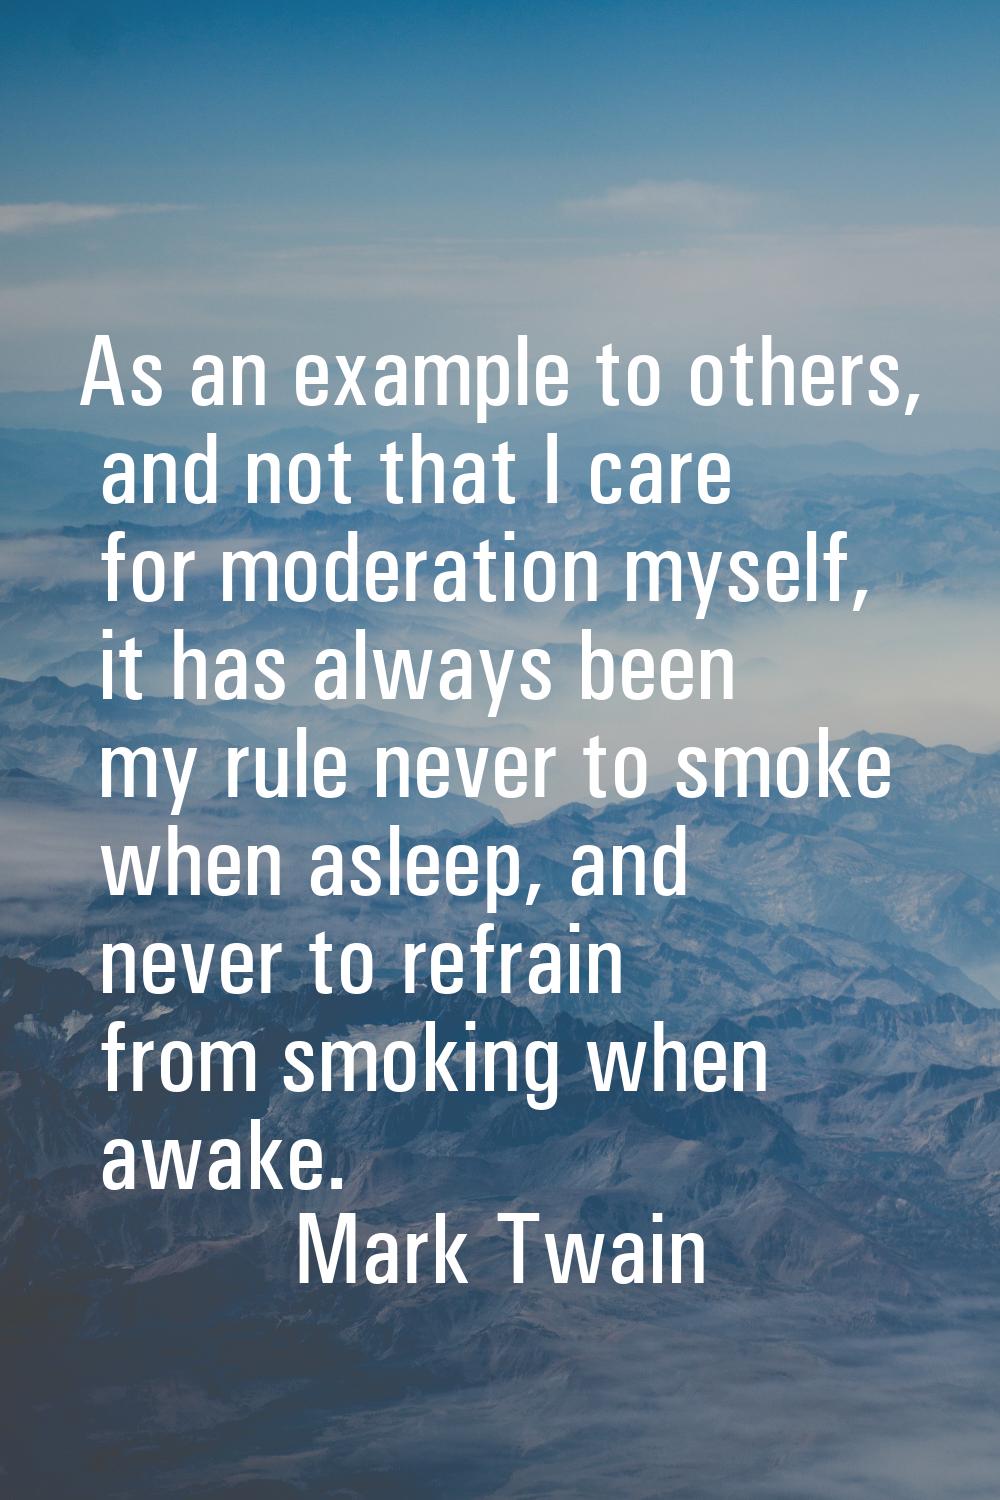 As an example to others, and not that I care for moderation myself, it has always been my rule neve